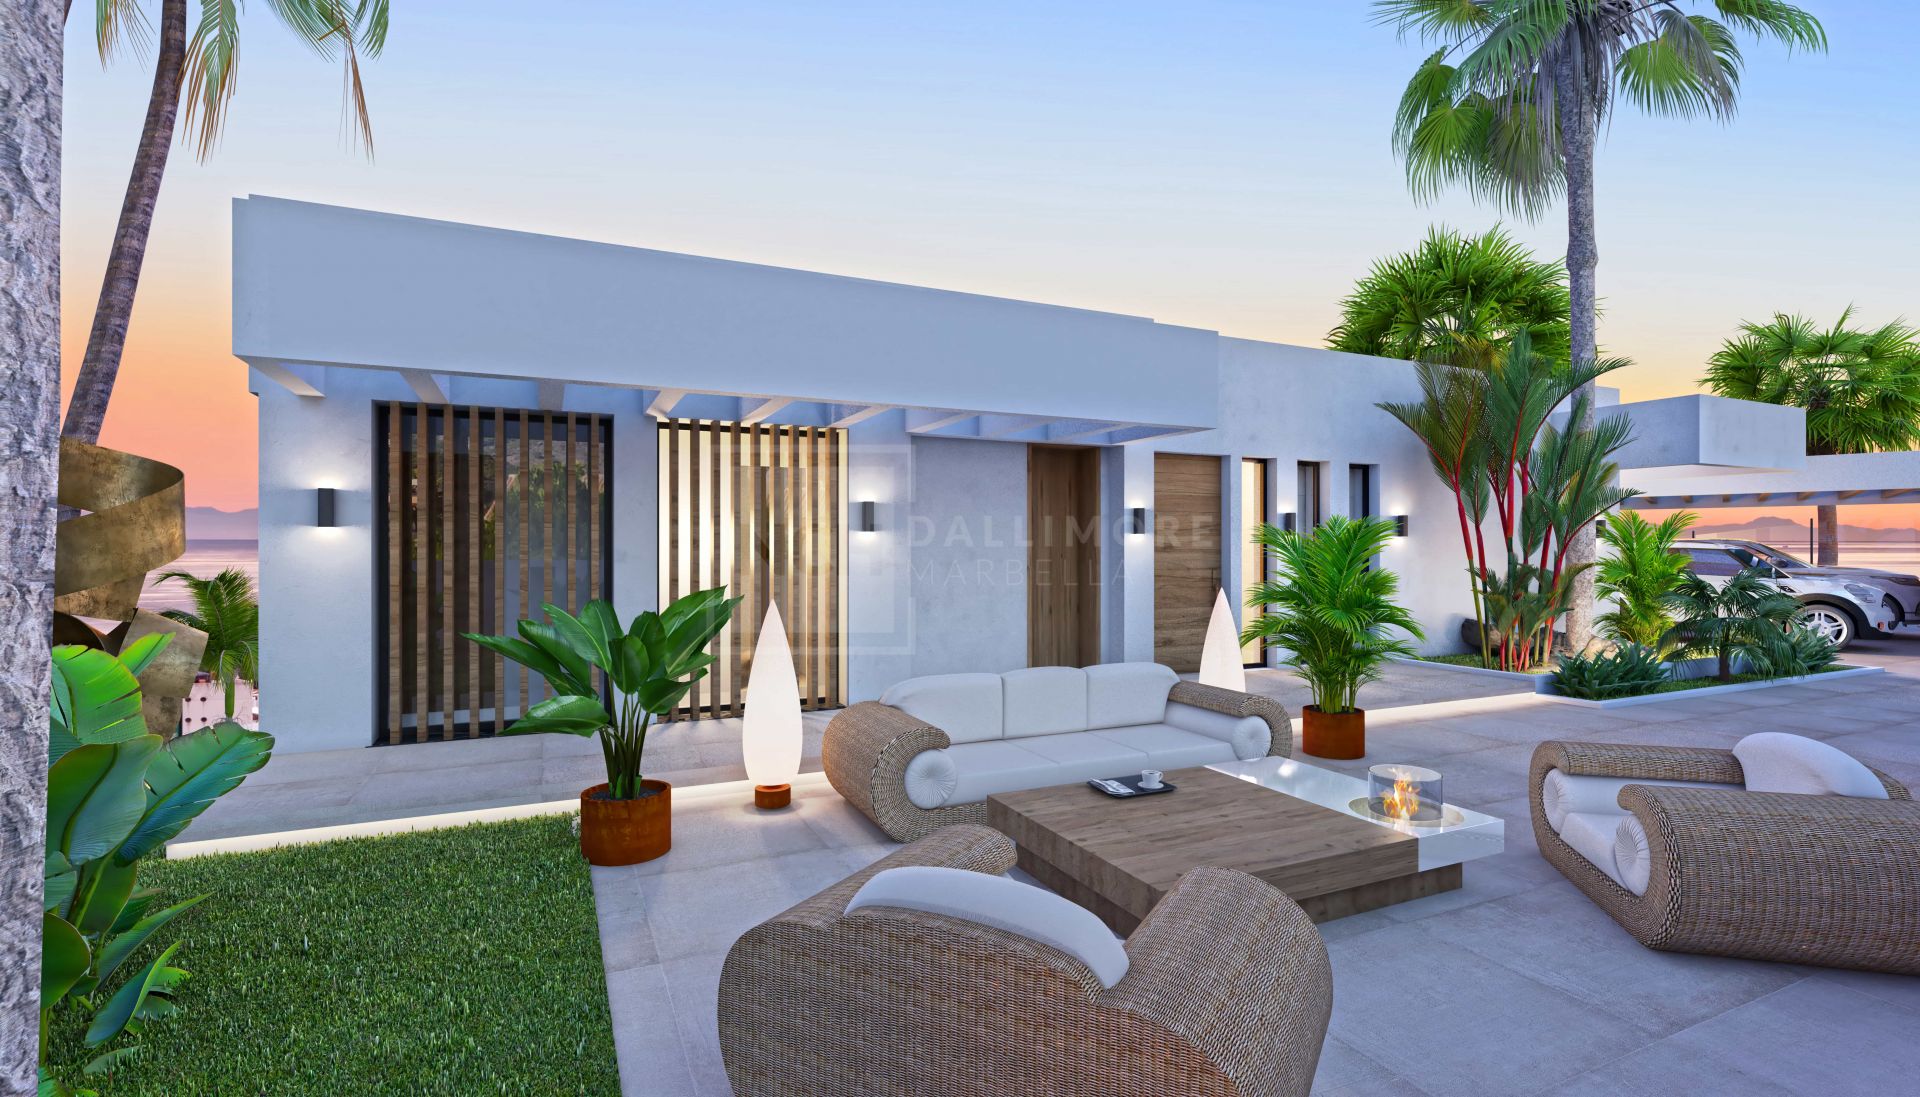 THE HEIGHTS - LUXURY VILLAS FOR SALE IN ESTEPONA